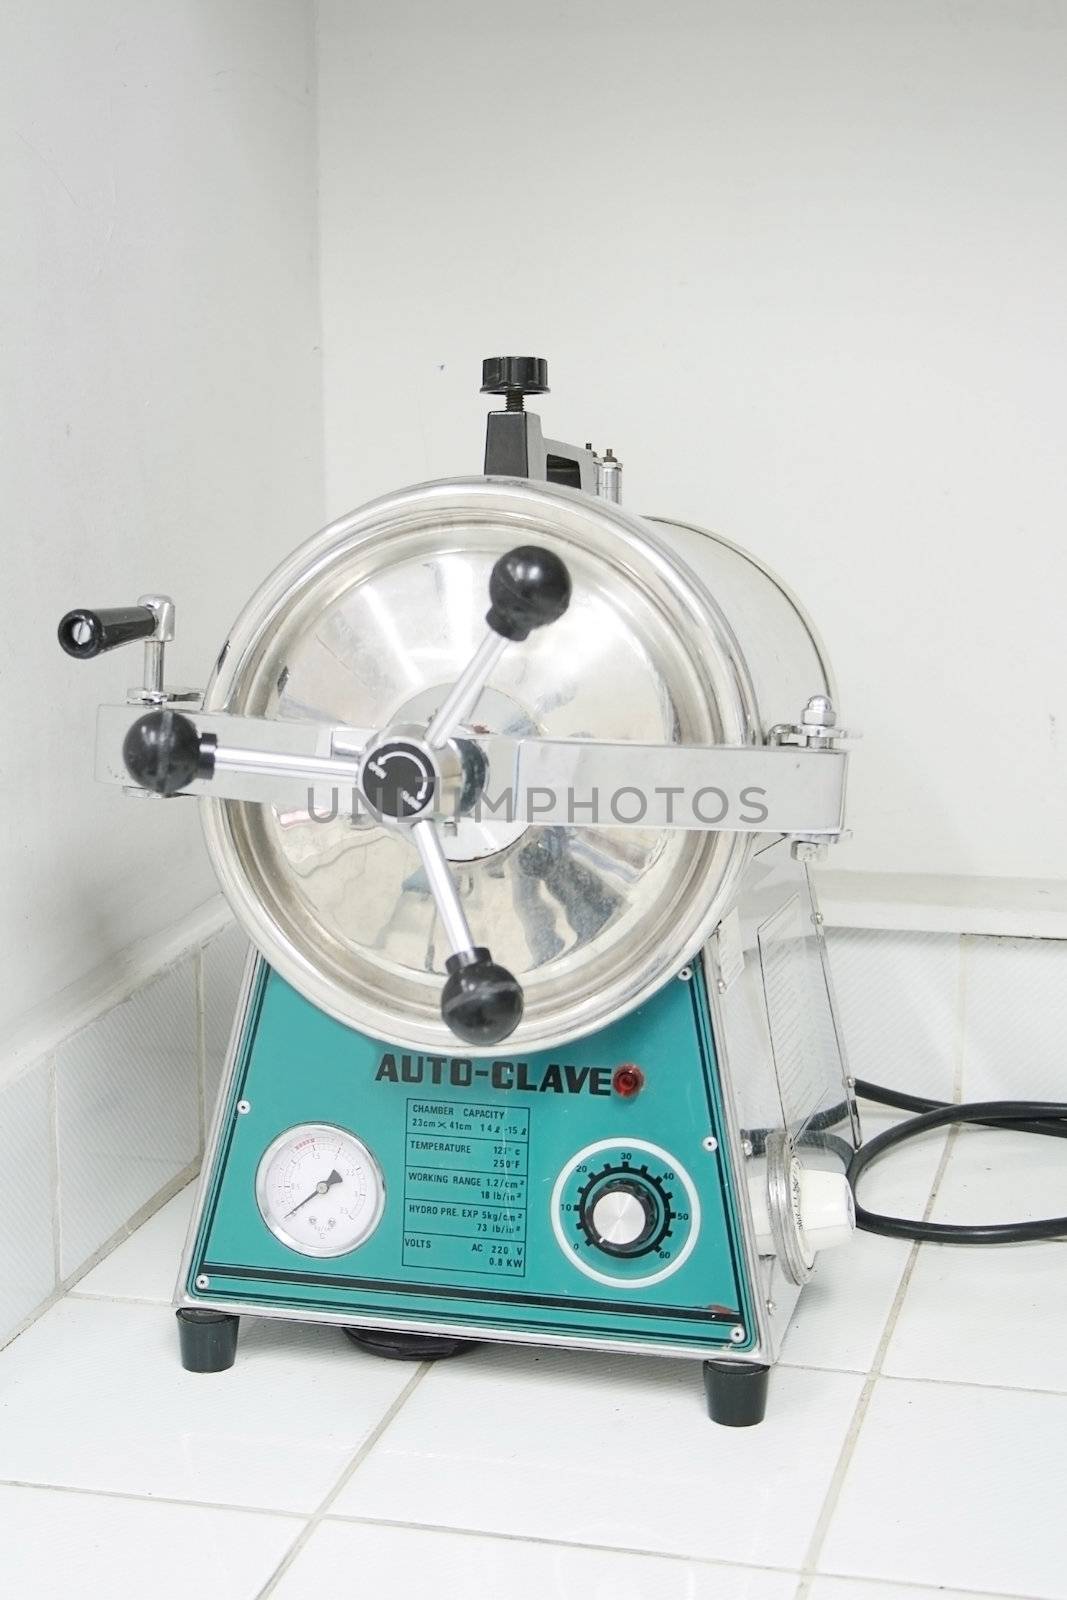 autoclave equipment inside the laboratory room
